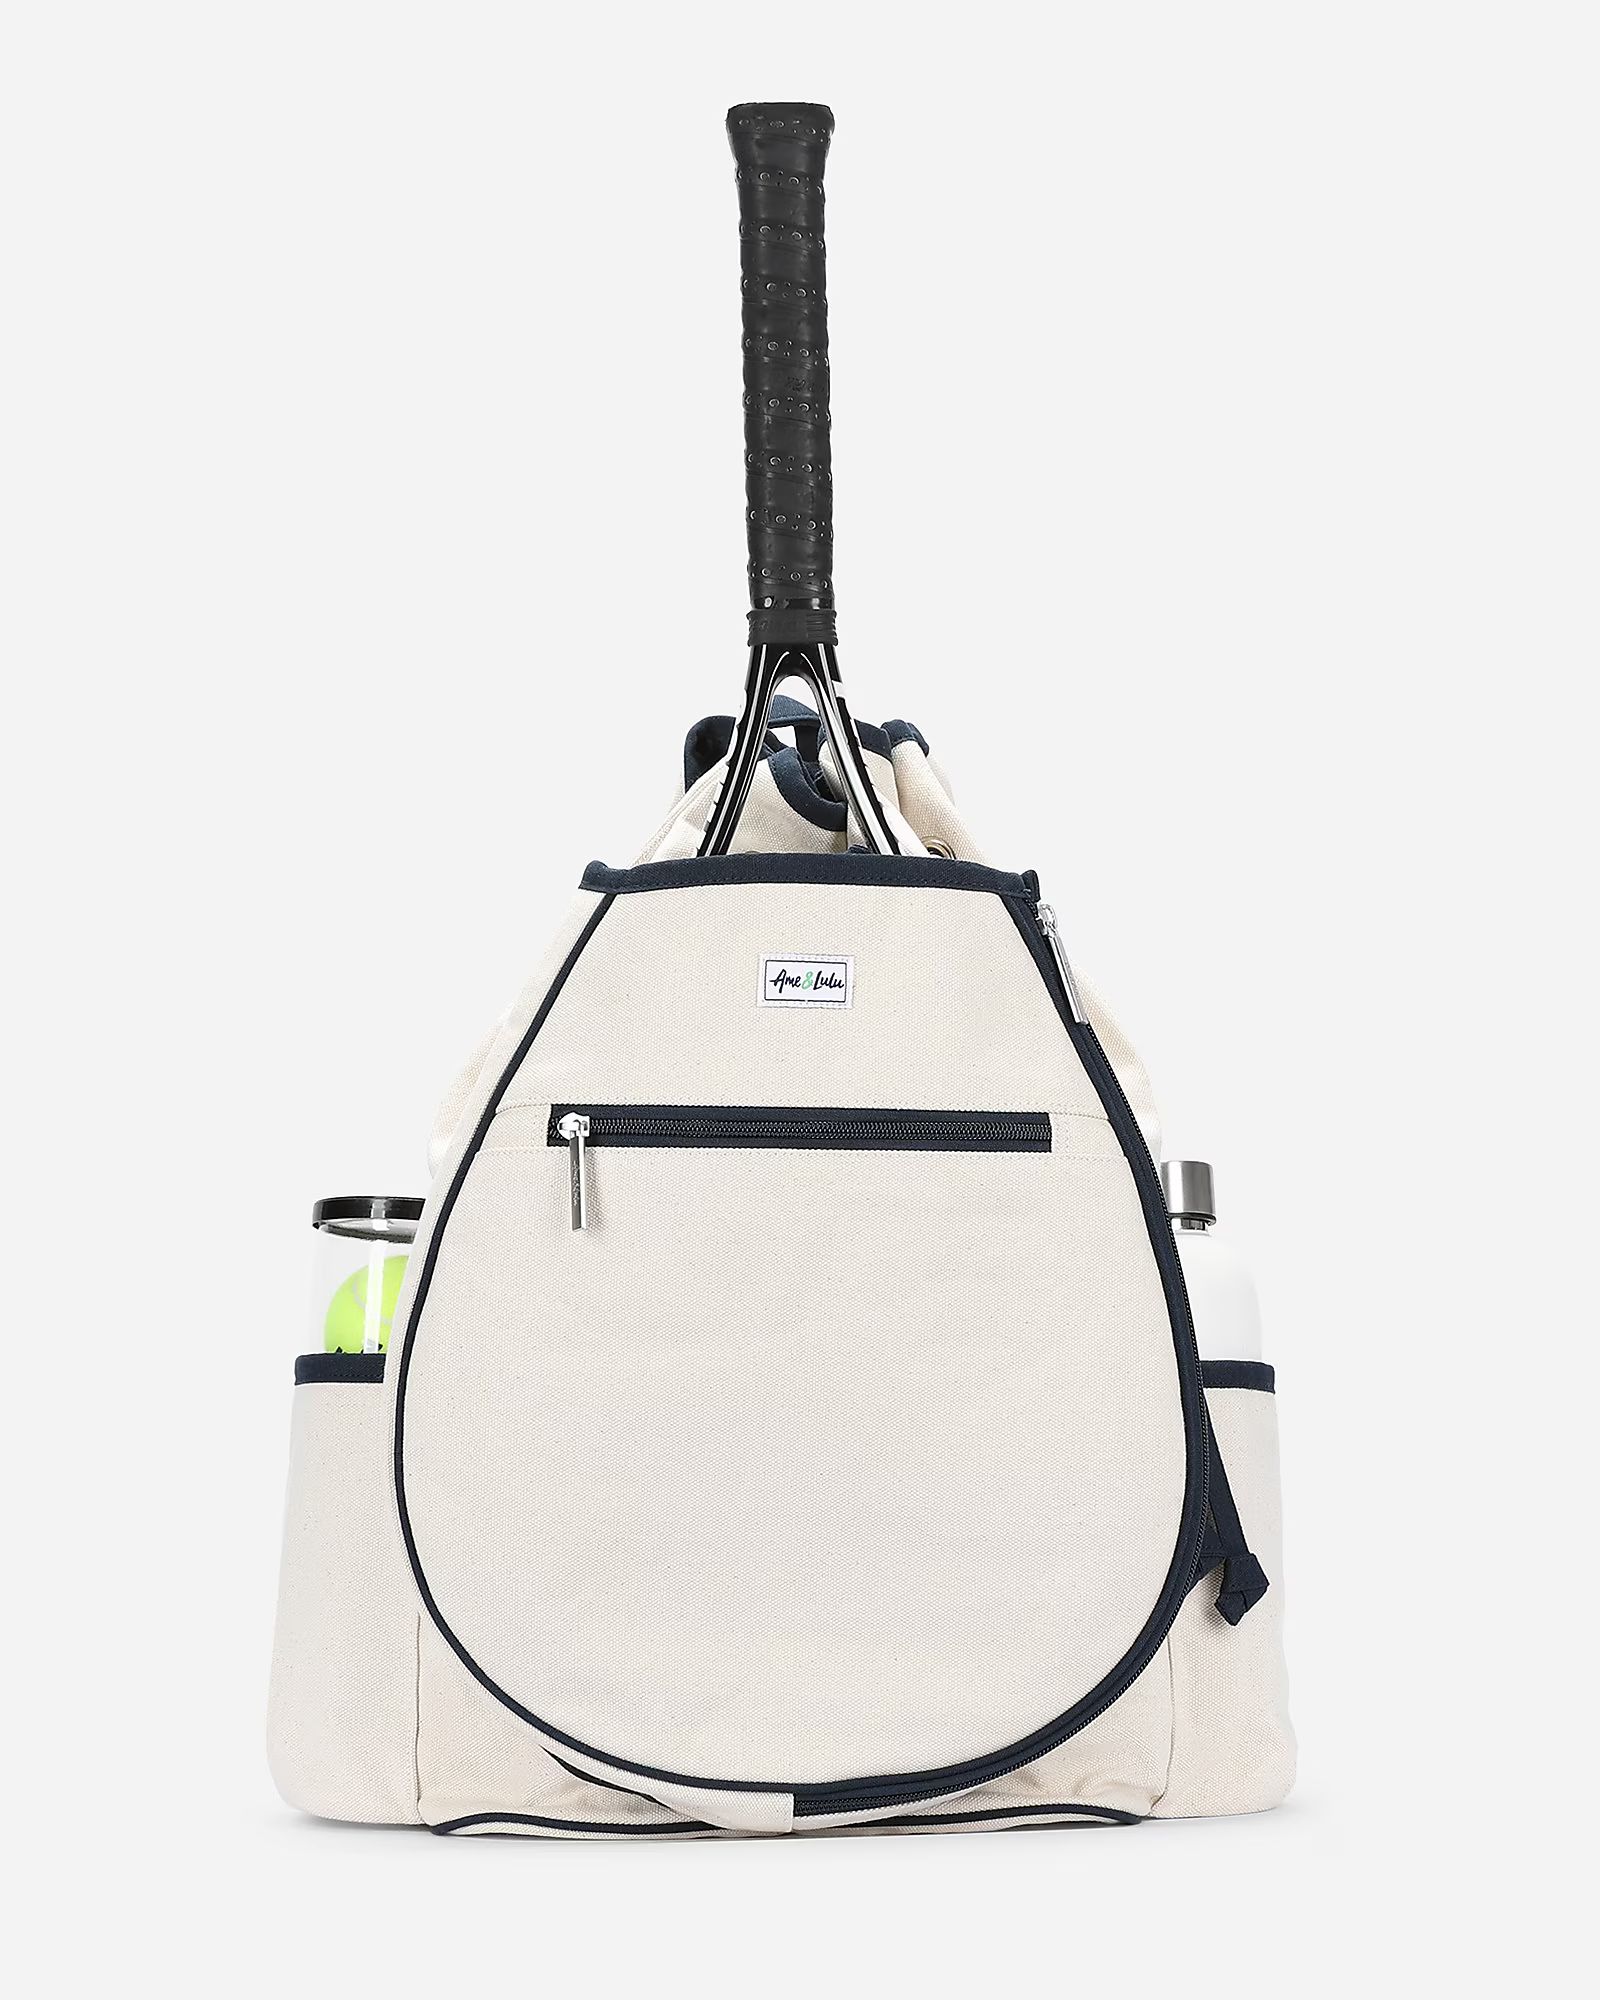 Ame & Lulu women's Hamptons tennis backpackSold & Shipped by AME & LULUJ.Crew MarketplaceThis ite... | J.Crew US